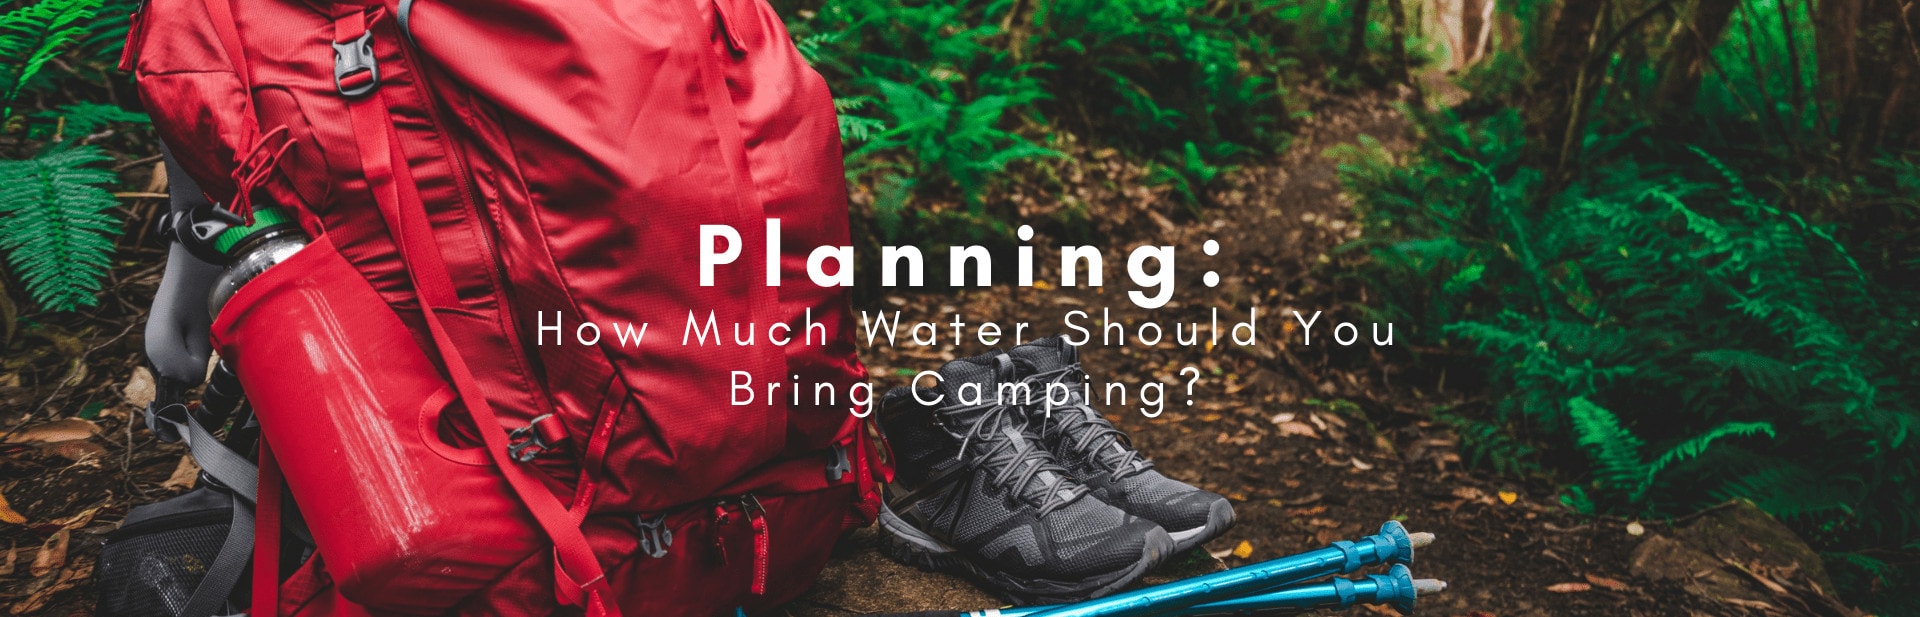 How Much Water Should I Bring Camping? - Outforia